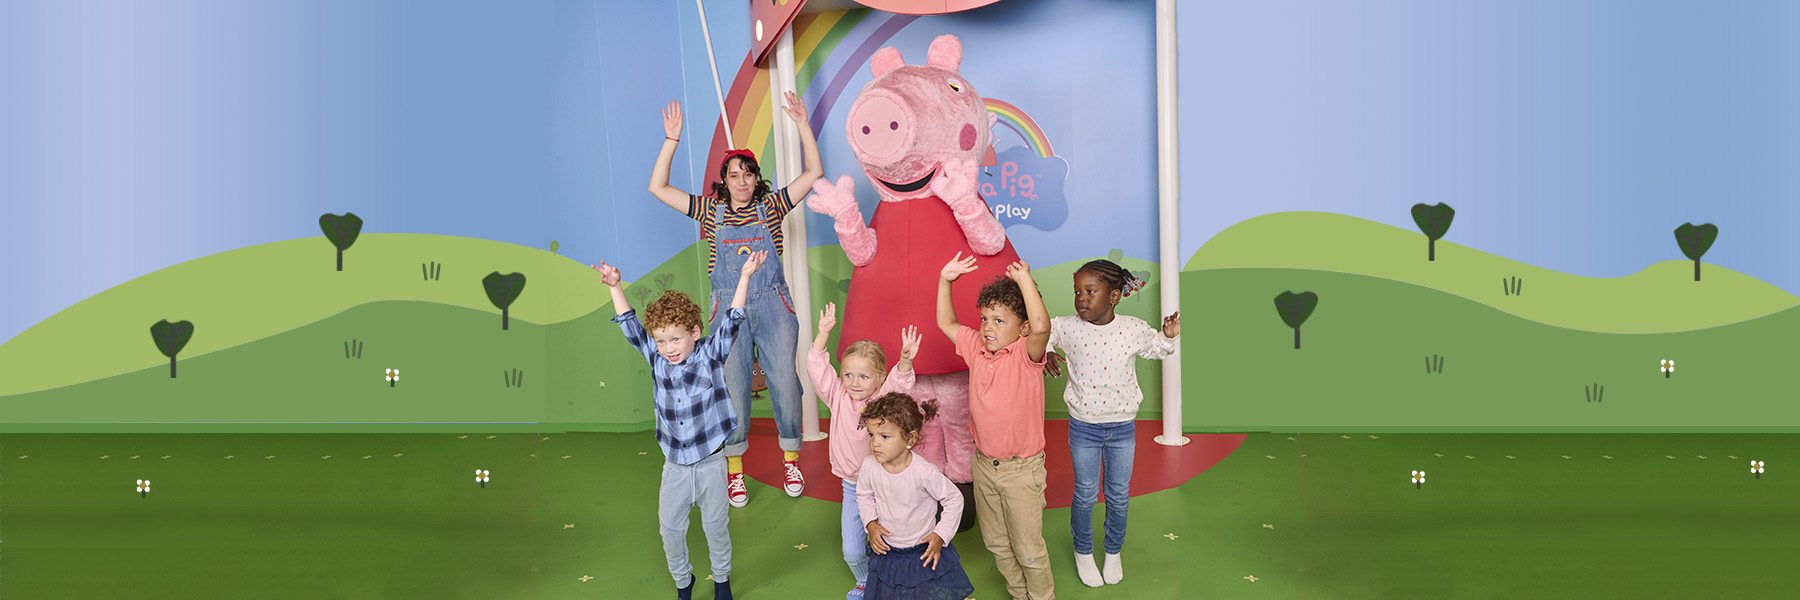 PEPPA PIG MERLIN DAY2 06 FUNTIME SHOW 0271 1800X600